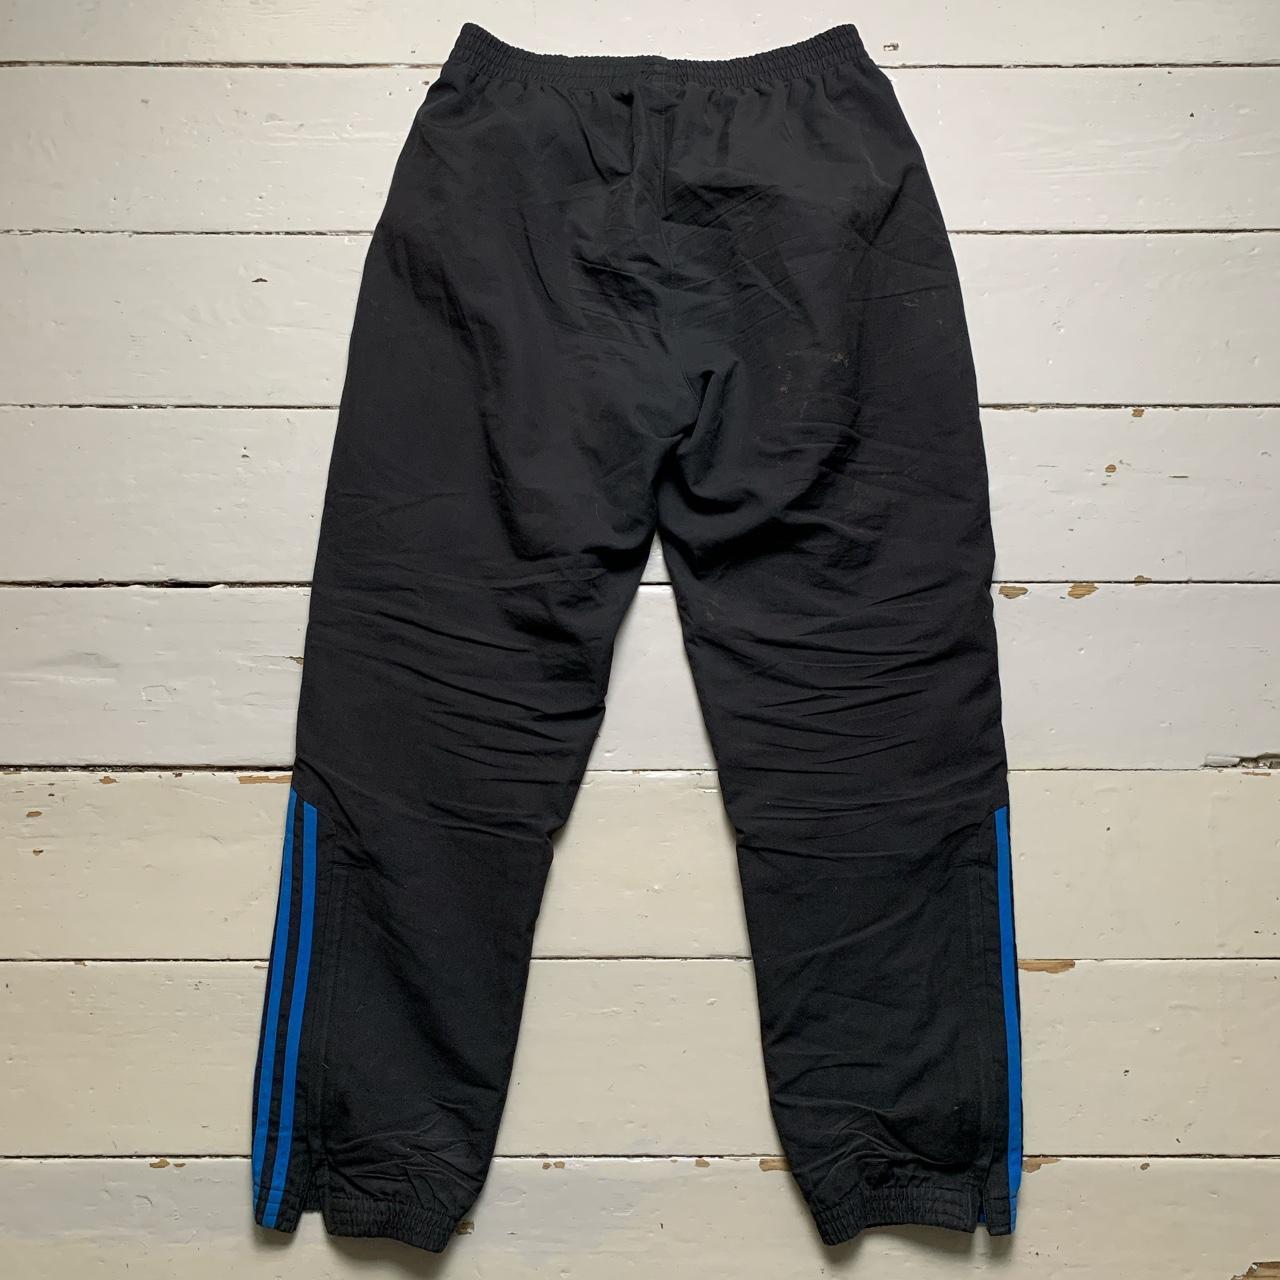 Adidas Black and Blue Baggy Shell Bottoms